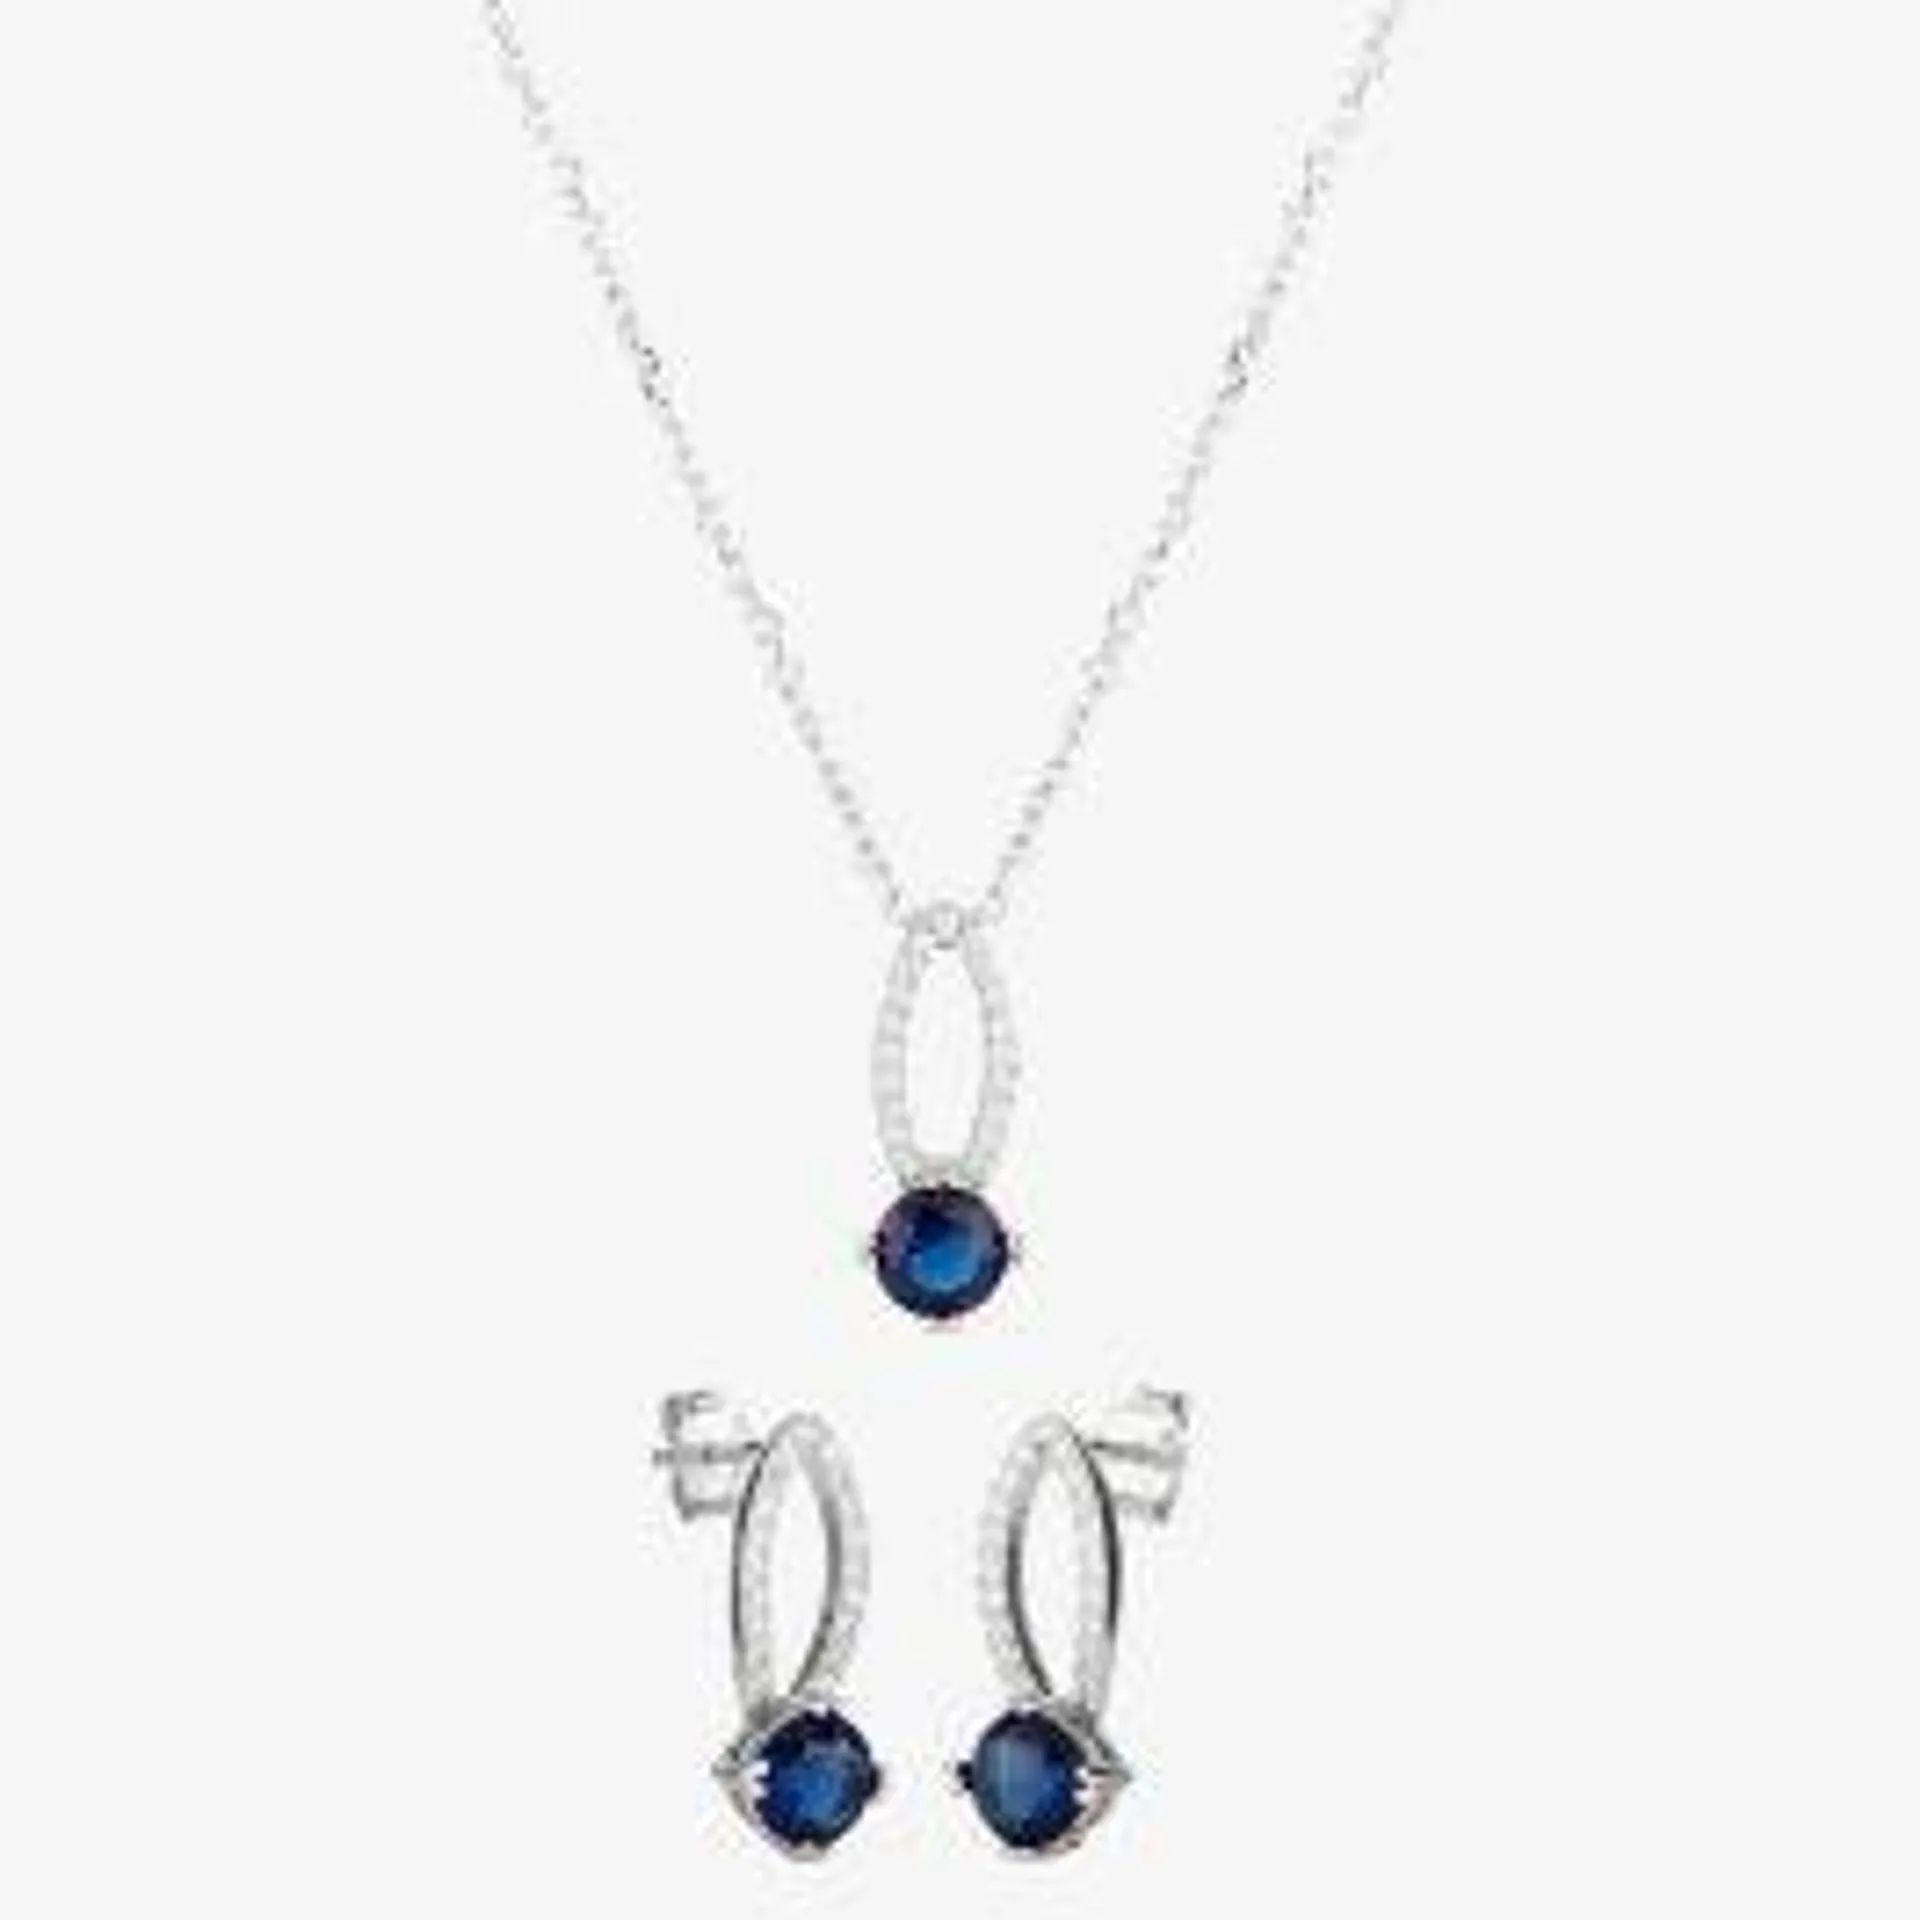 Silver Blue Cubic Zirconia Open Pendant and Earring Set SET8296